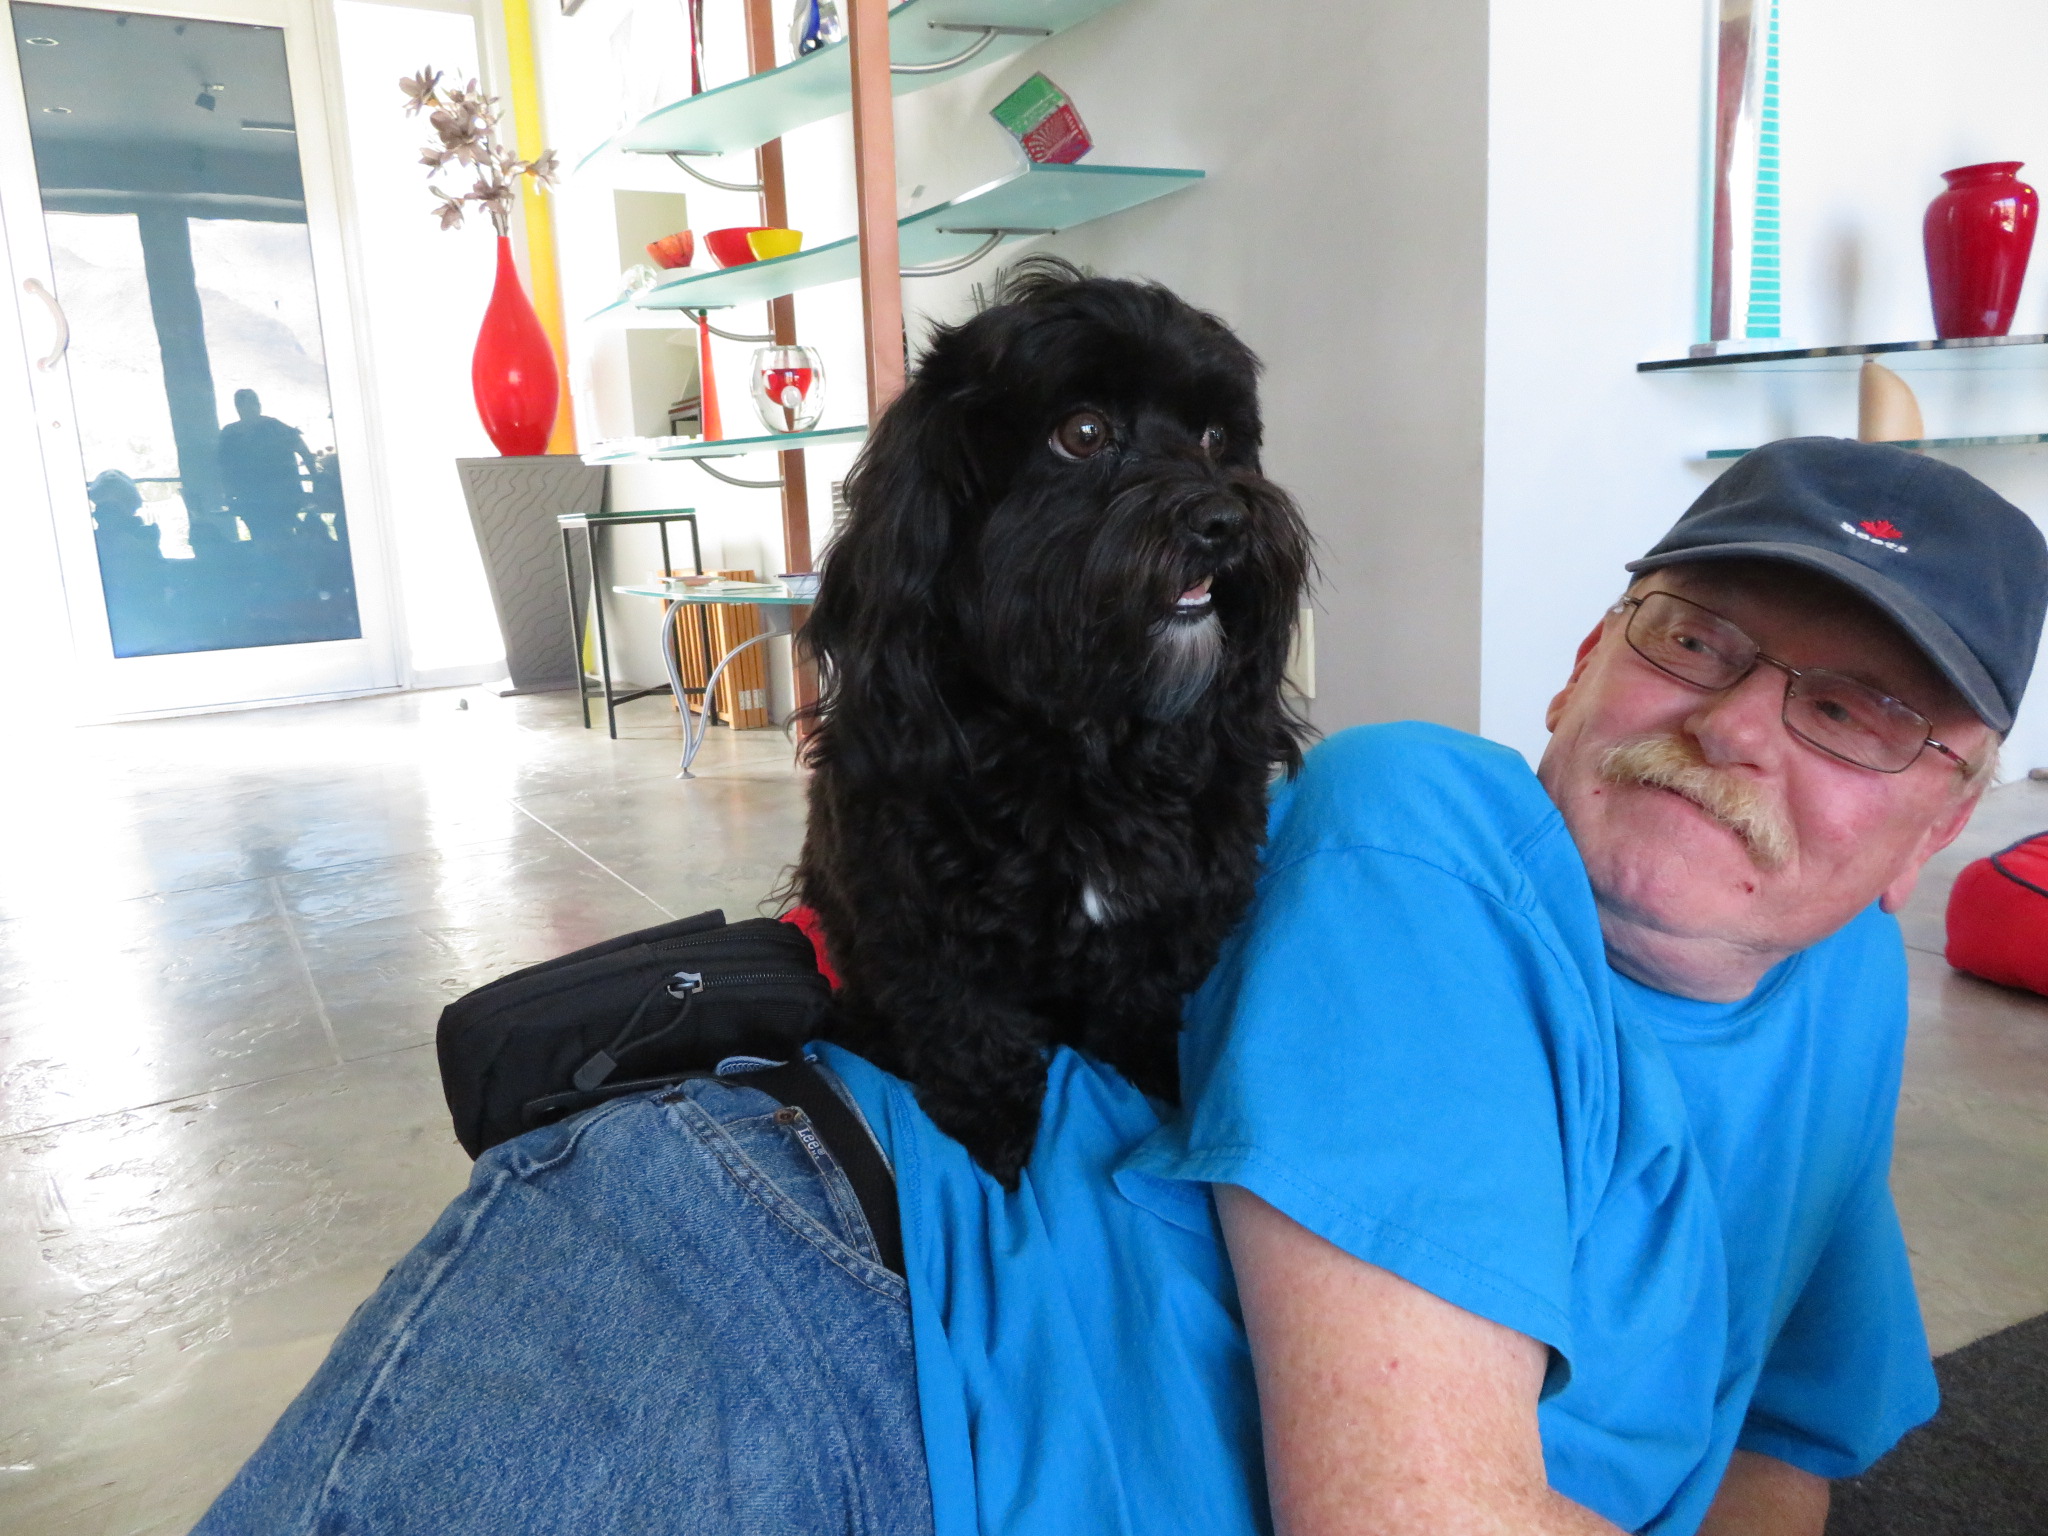 a black dog leaning on a man wearing a blue shirt, eyeglasses, and a hat